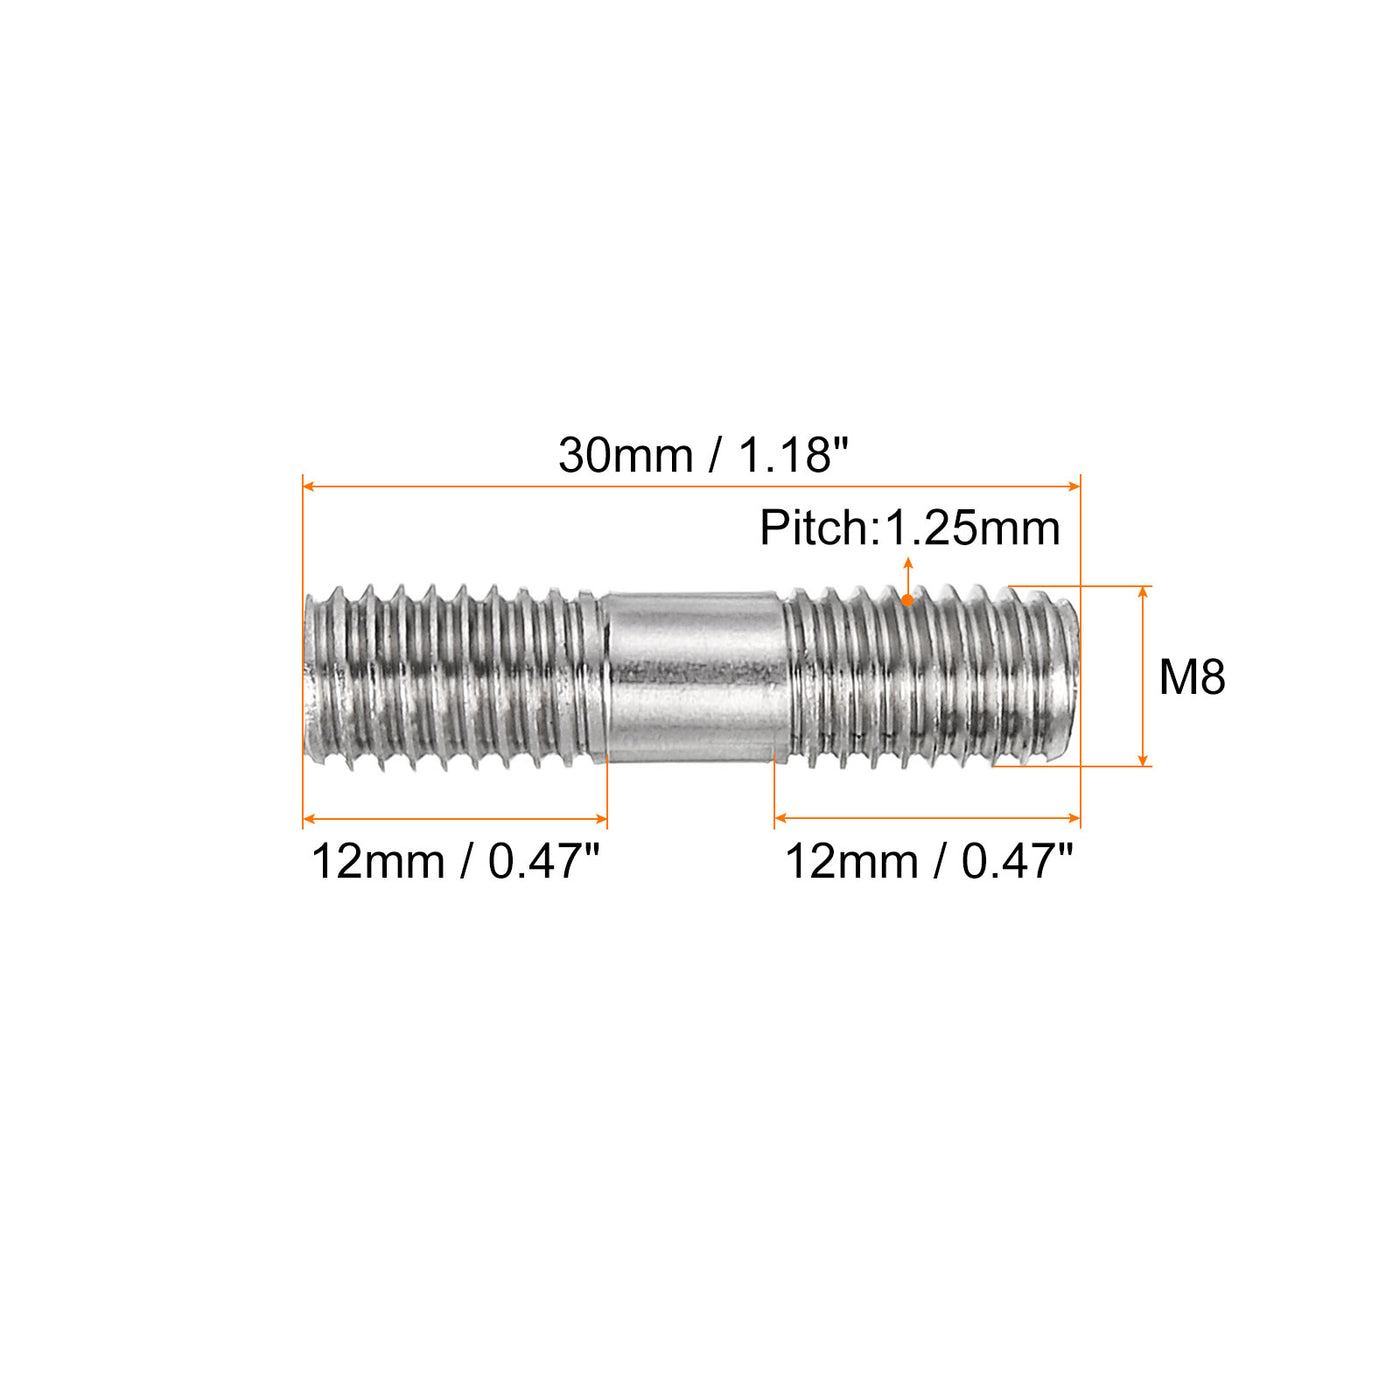 uxcell Uxcell 15Pcs M8x30mm 304 Stainless Steel Double End Threaded Stud Screw